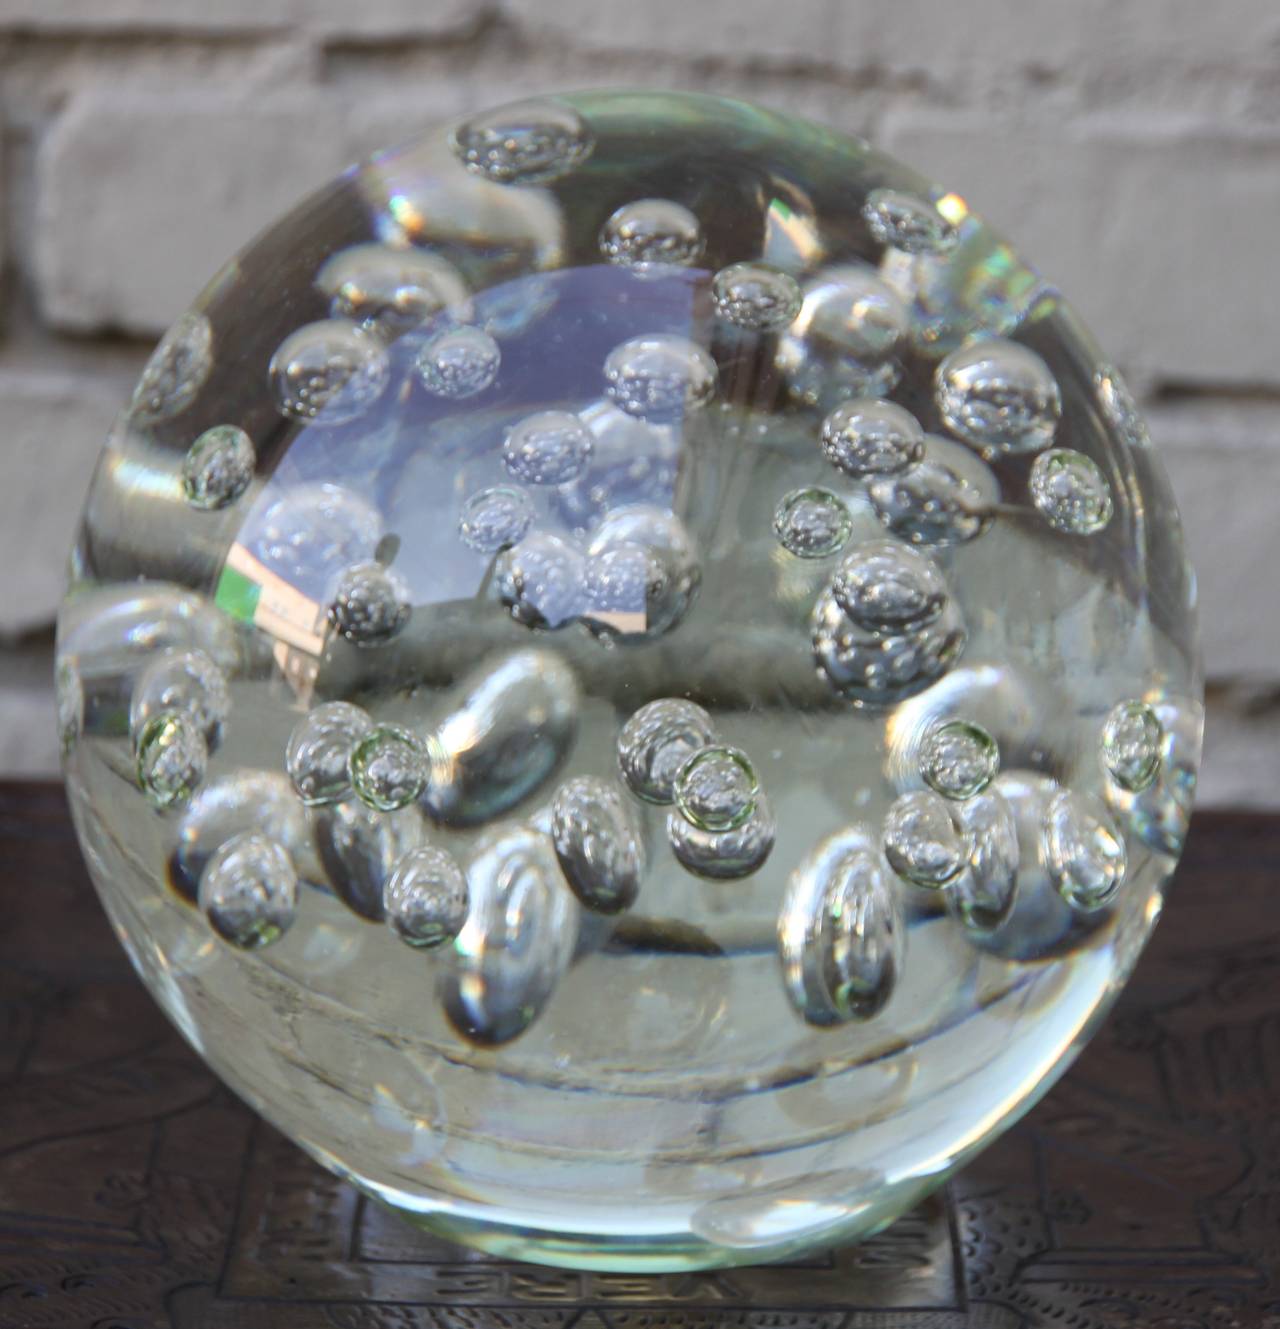 Italian Mid-Century crystal sphere with air bubbles throughout. Flat on bottom to sit on surfaces.